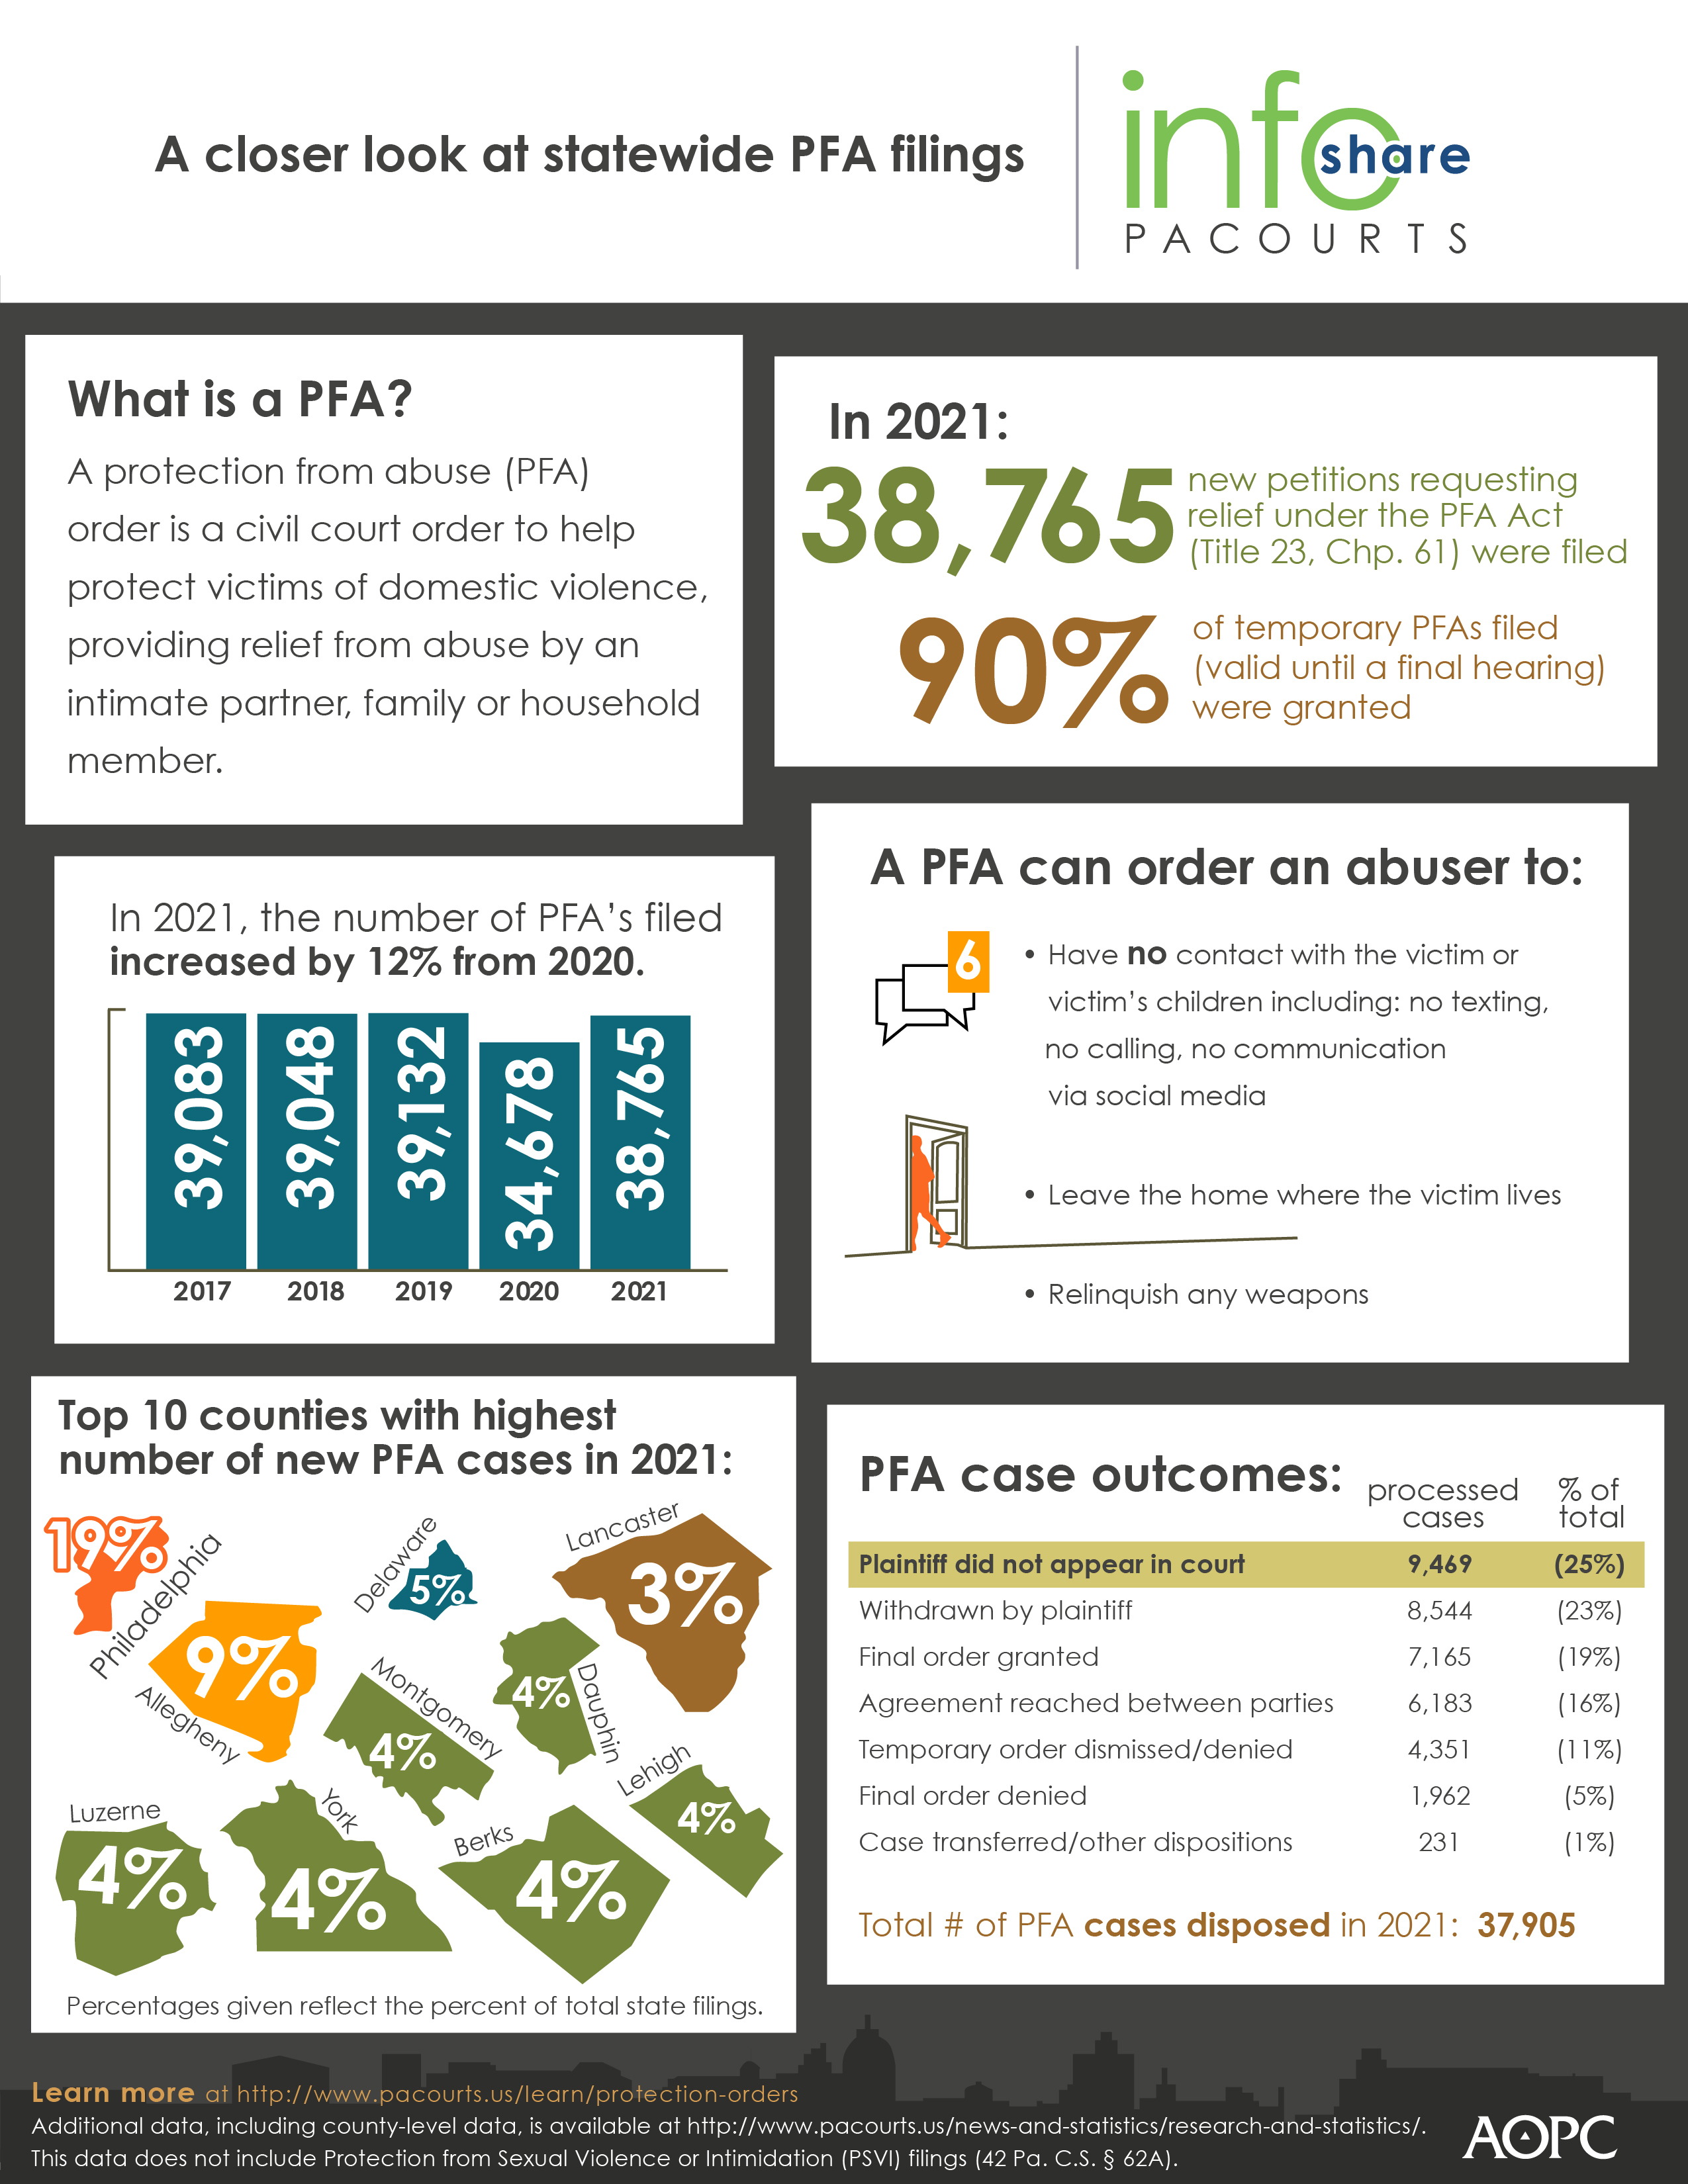 infographic about PFAs in Pennsylvania